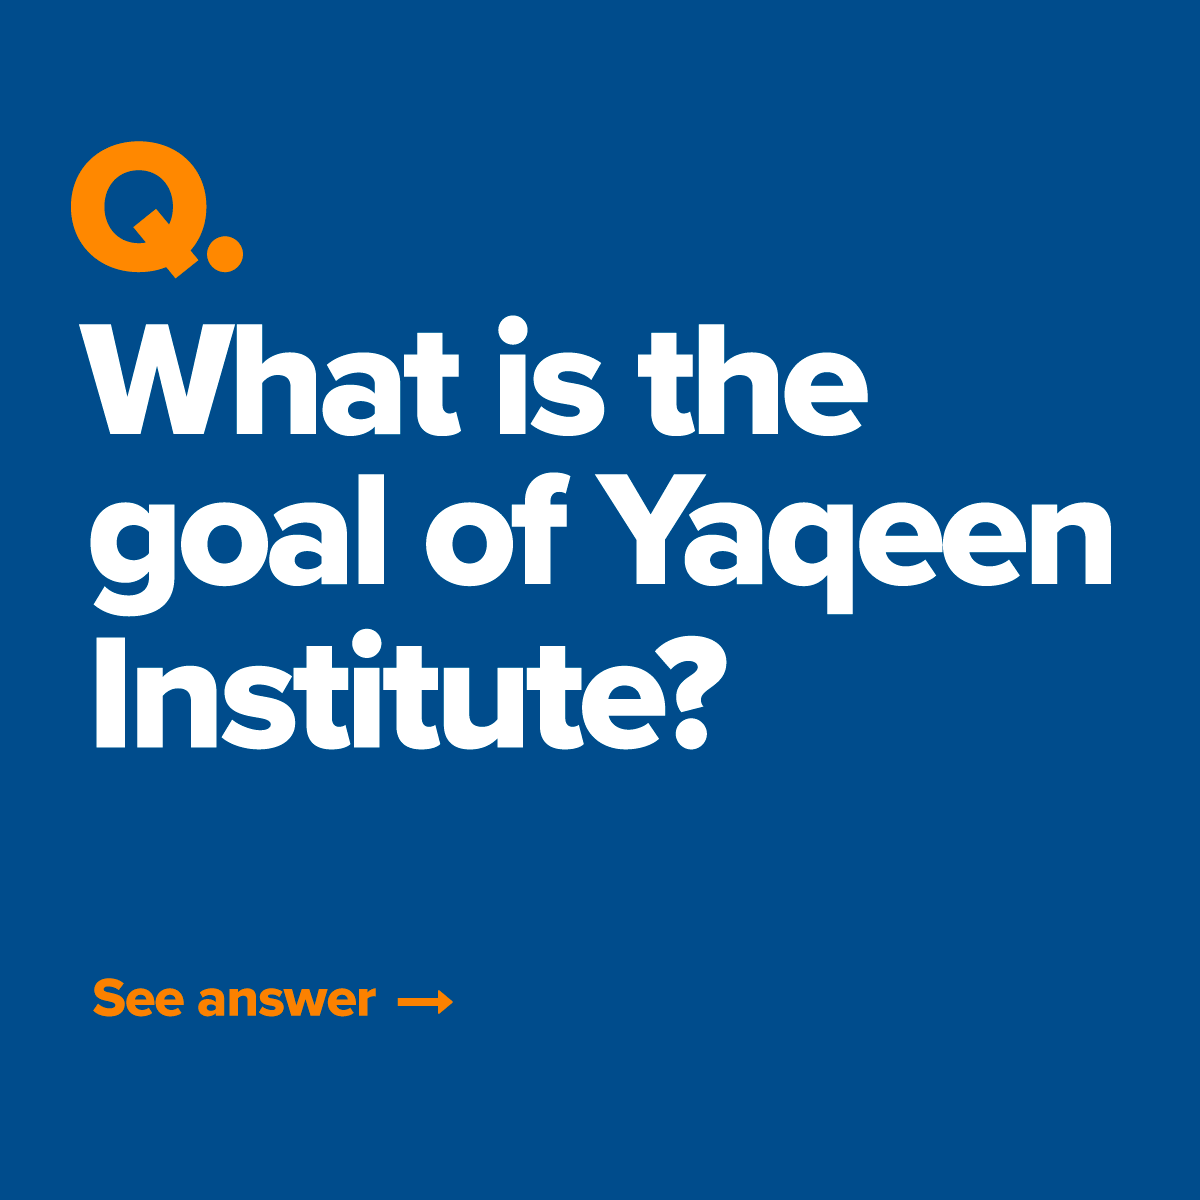 Question 1: What is the goal of Yaqeen Institute?